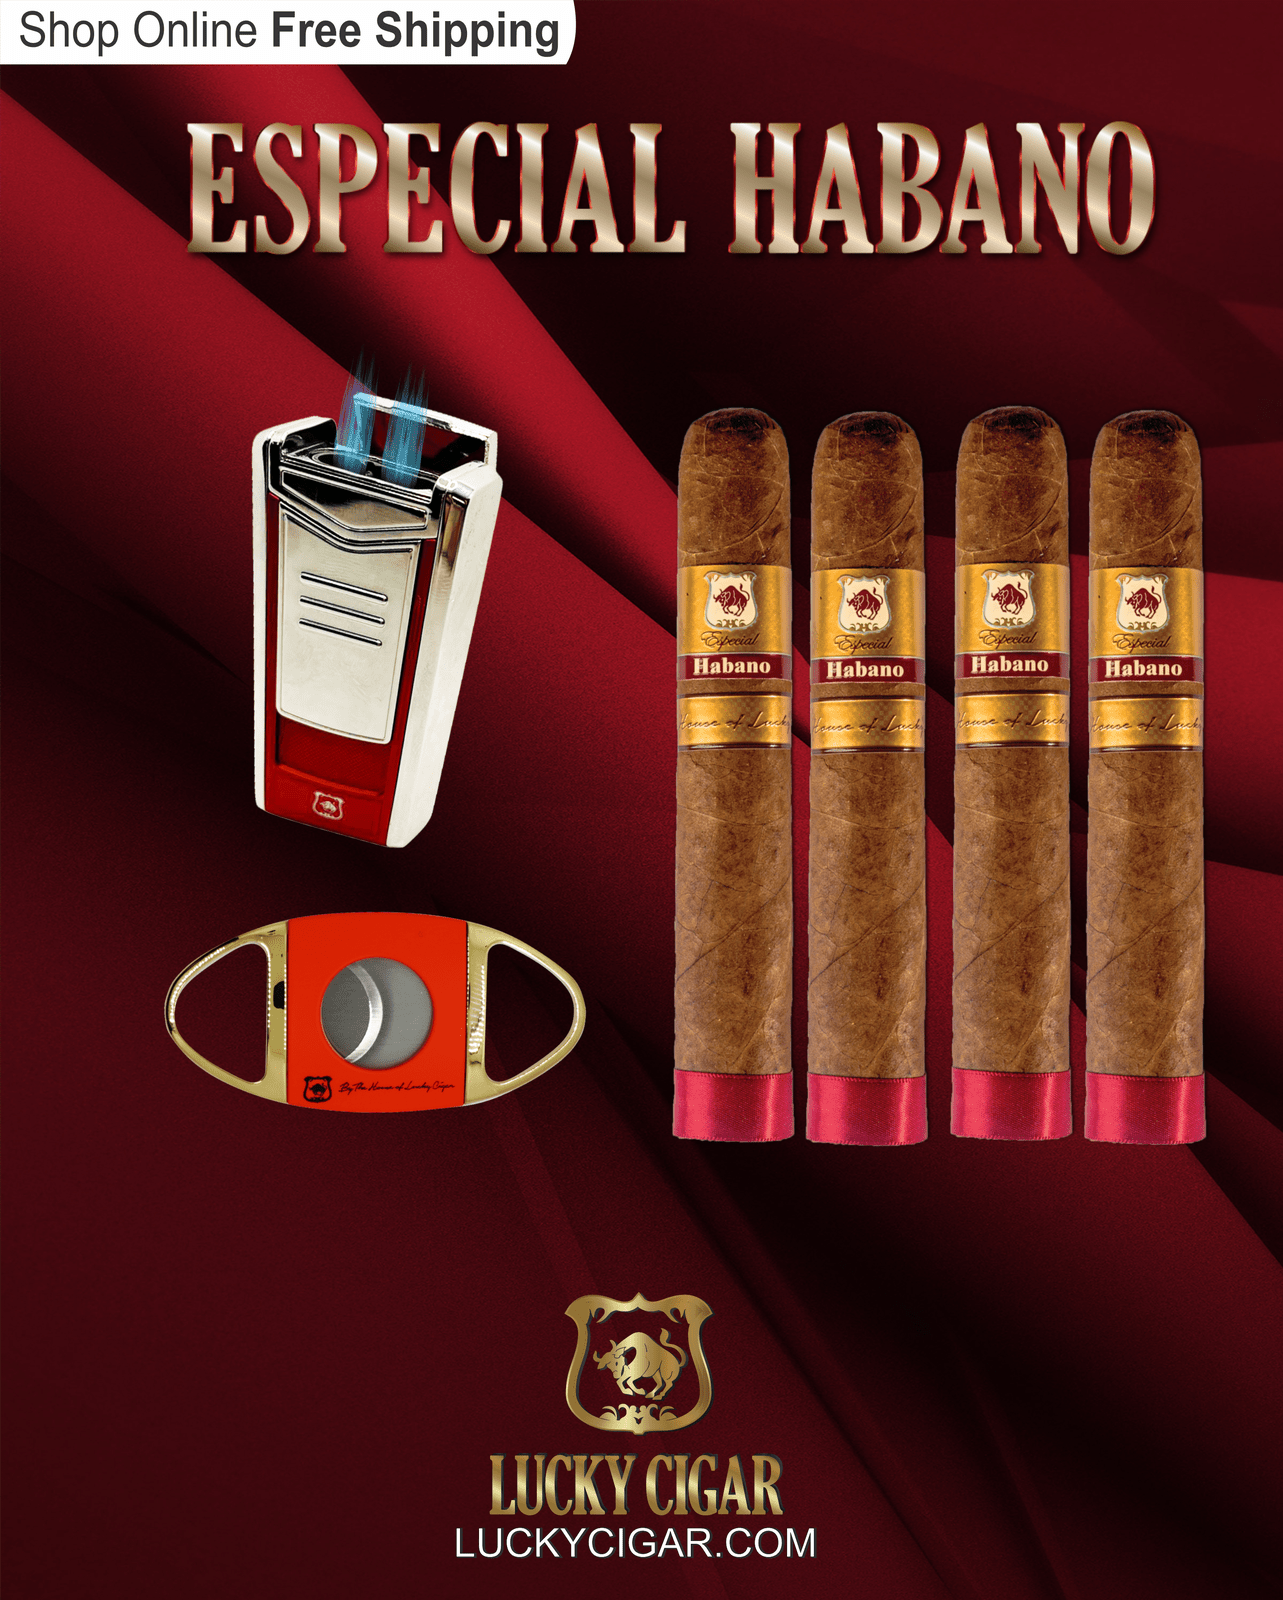 Habano Cigars: Especial Habano by Lucky Cigar: Set of 4 Cigars 4 Toro, with Cutter and Torch